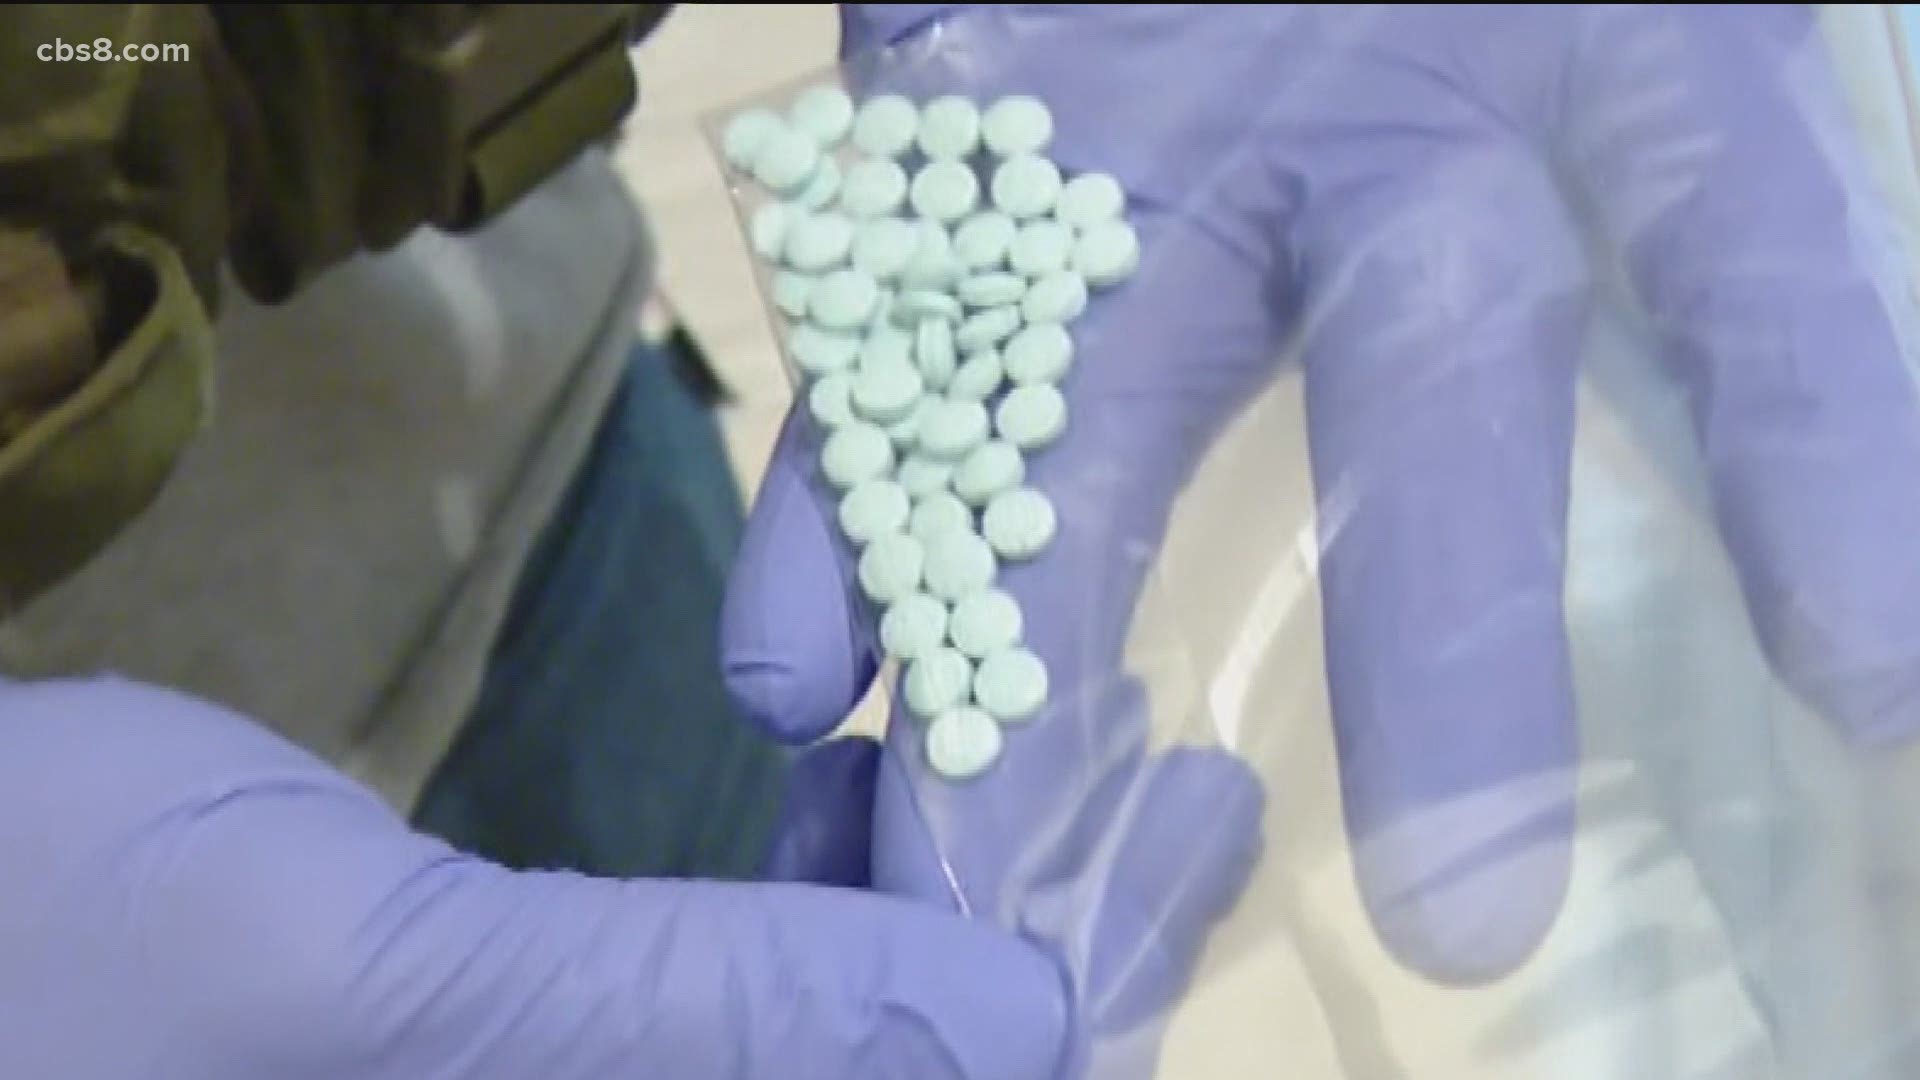 Officials say overdose deaths are spiking across the county, rising from 151 such deaths in 2019 to 461 in 2020.